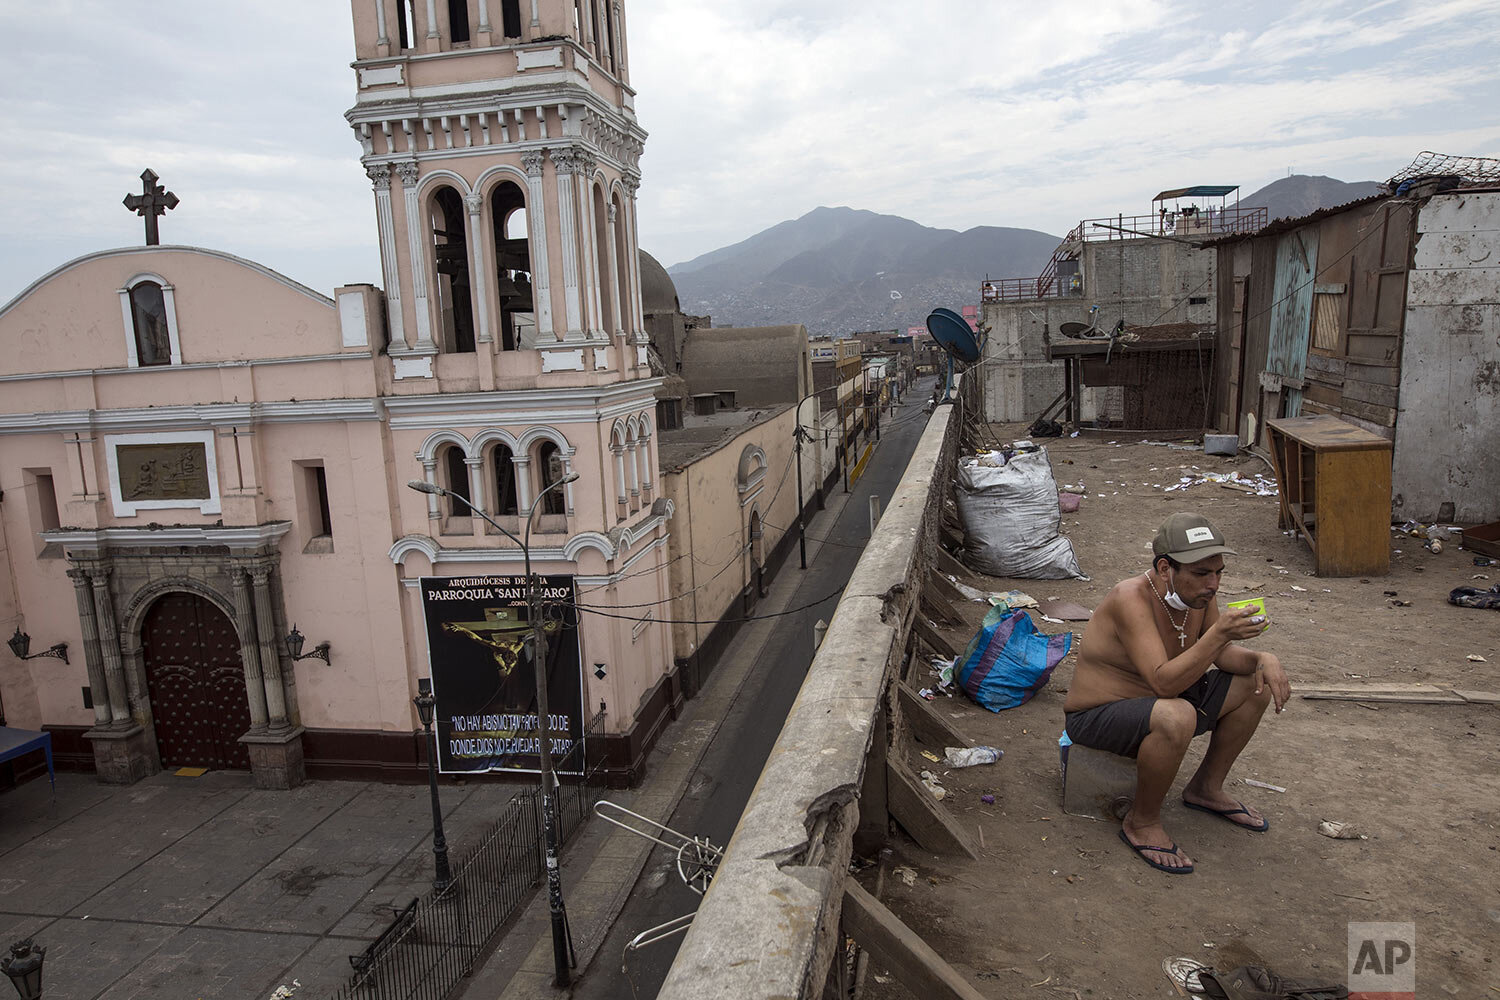  In this April 5, 2020 photo, Raul Coyantes eats his breakfast on the rooftop of the deteriorating building nicknamed "Luriganchito," after the country's most populous prison, where he rents a room, in Lima, Peru. Located just a few blocks from the p